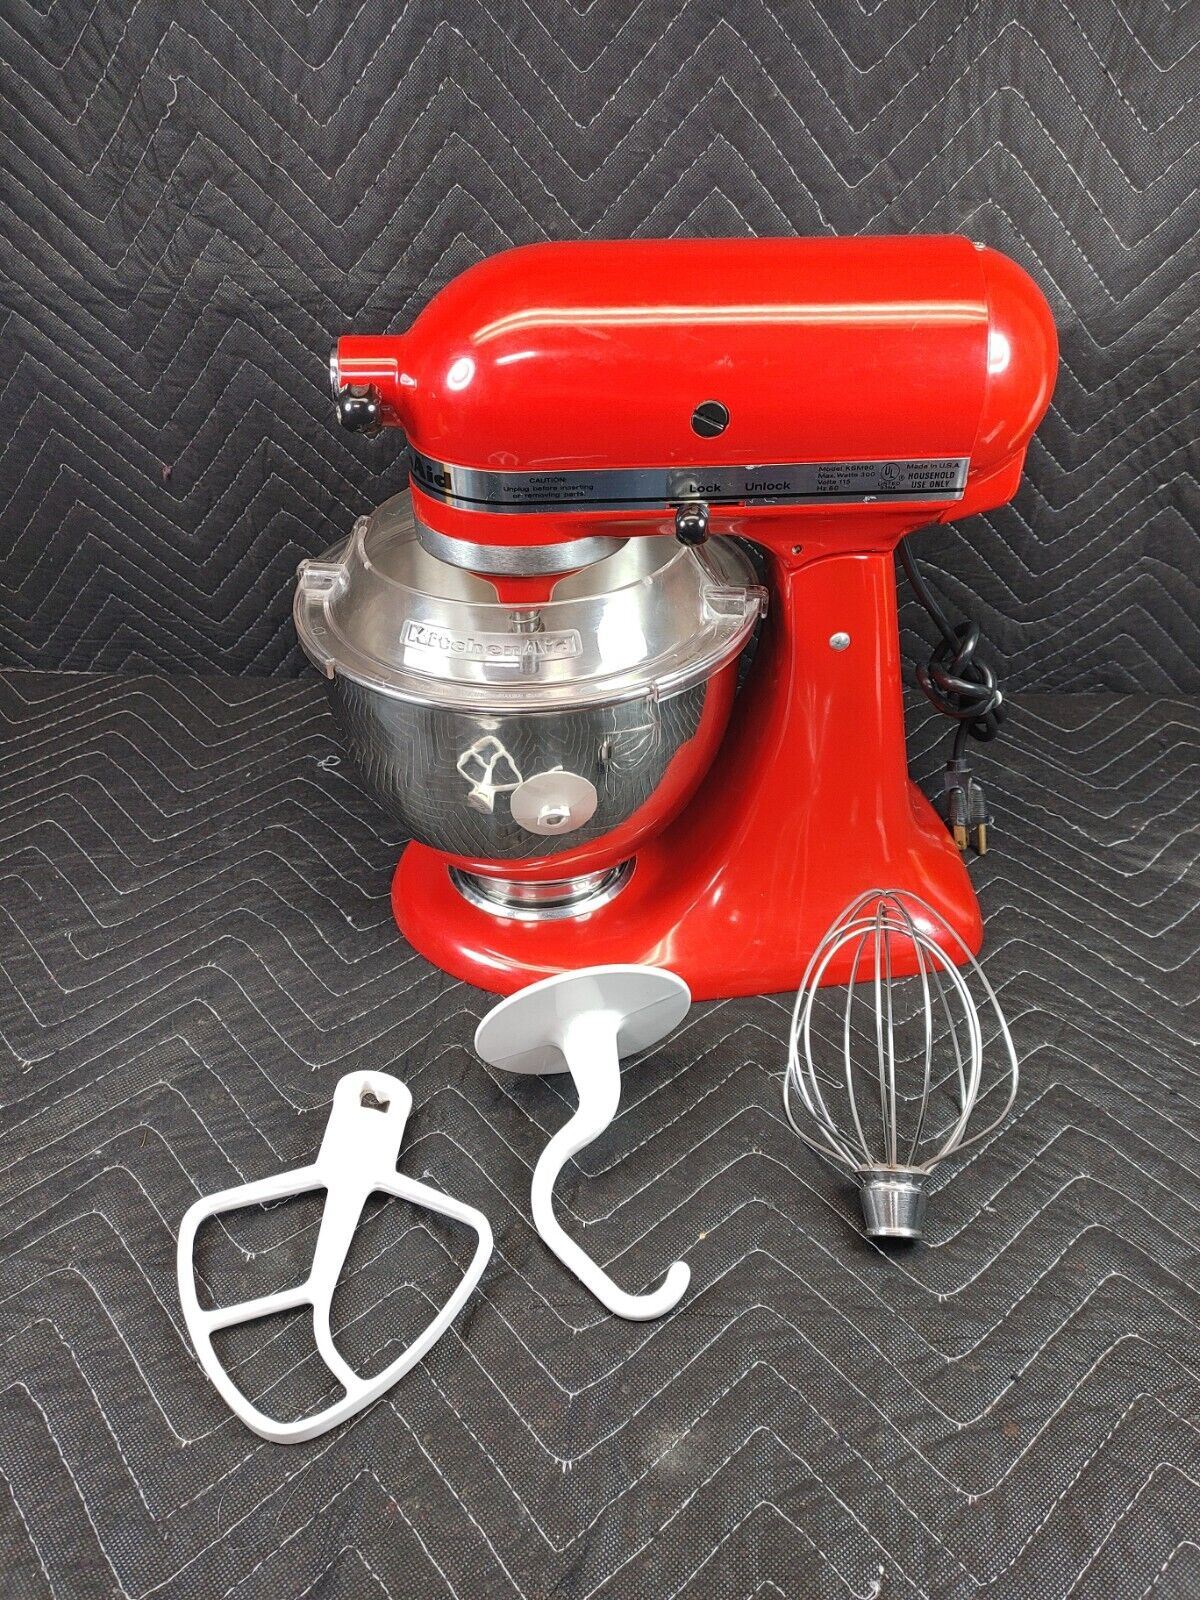 KitchenAid Ultra Power 4.5-Quart 10-Speed Imperial Grey Stand Mixer at